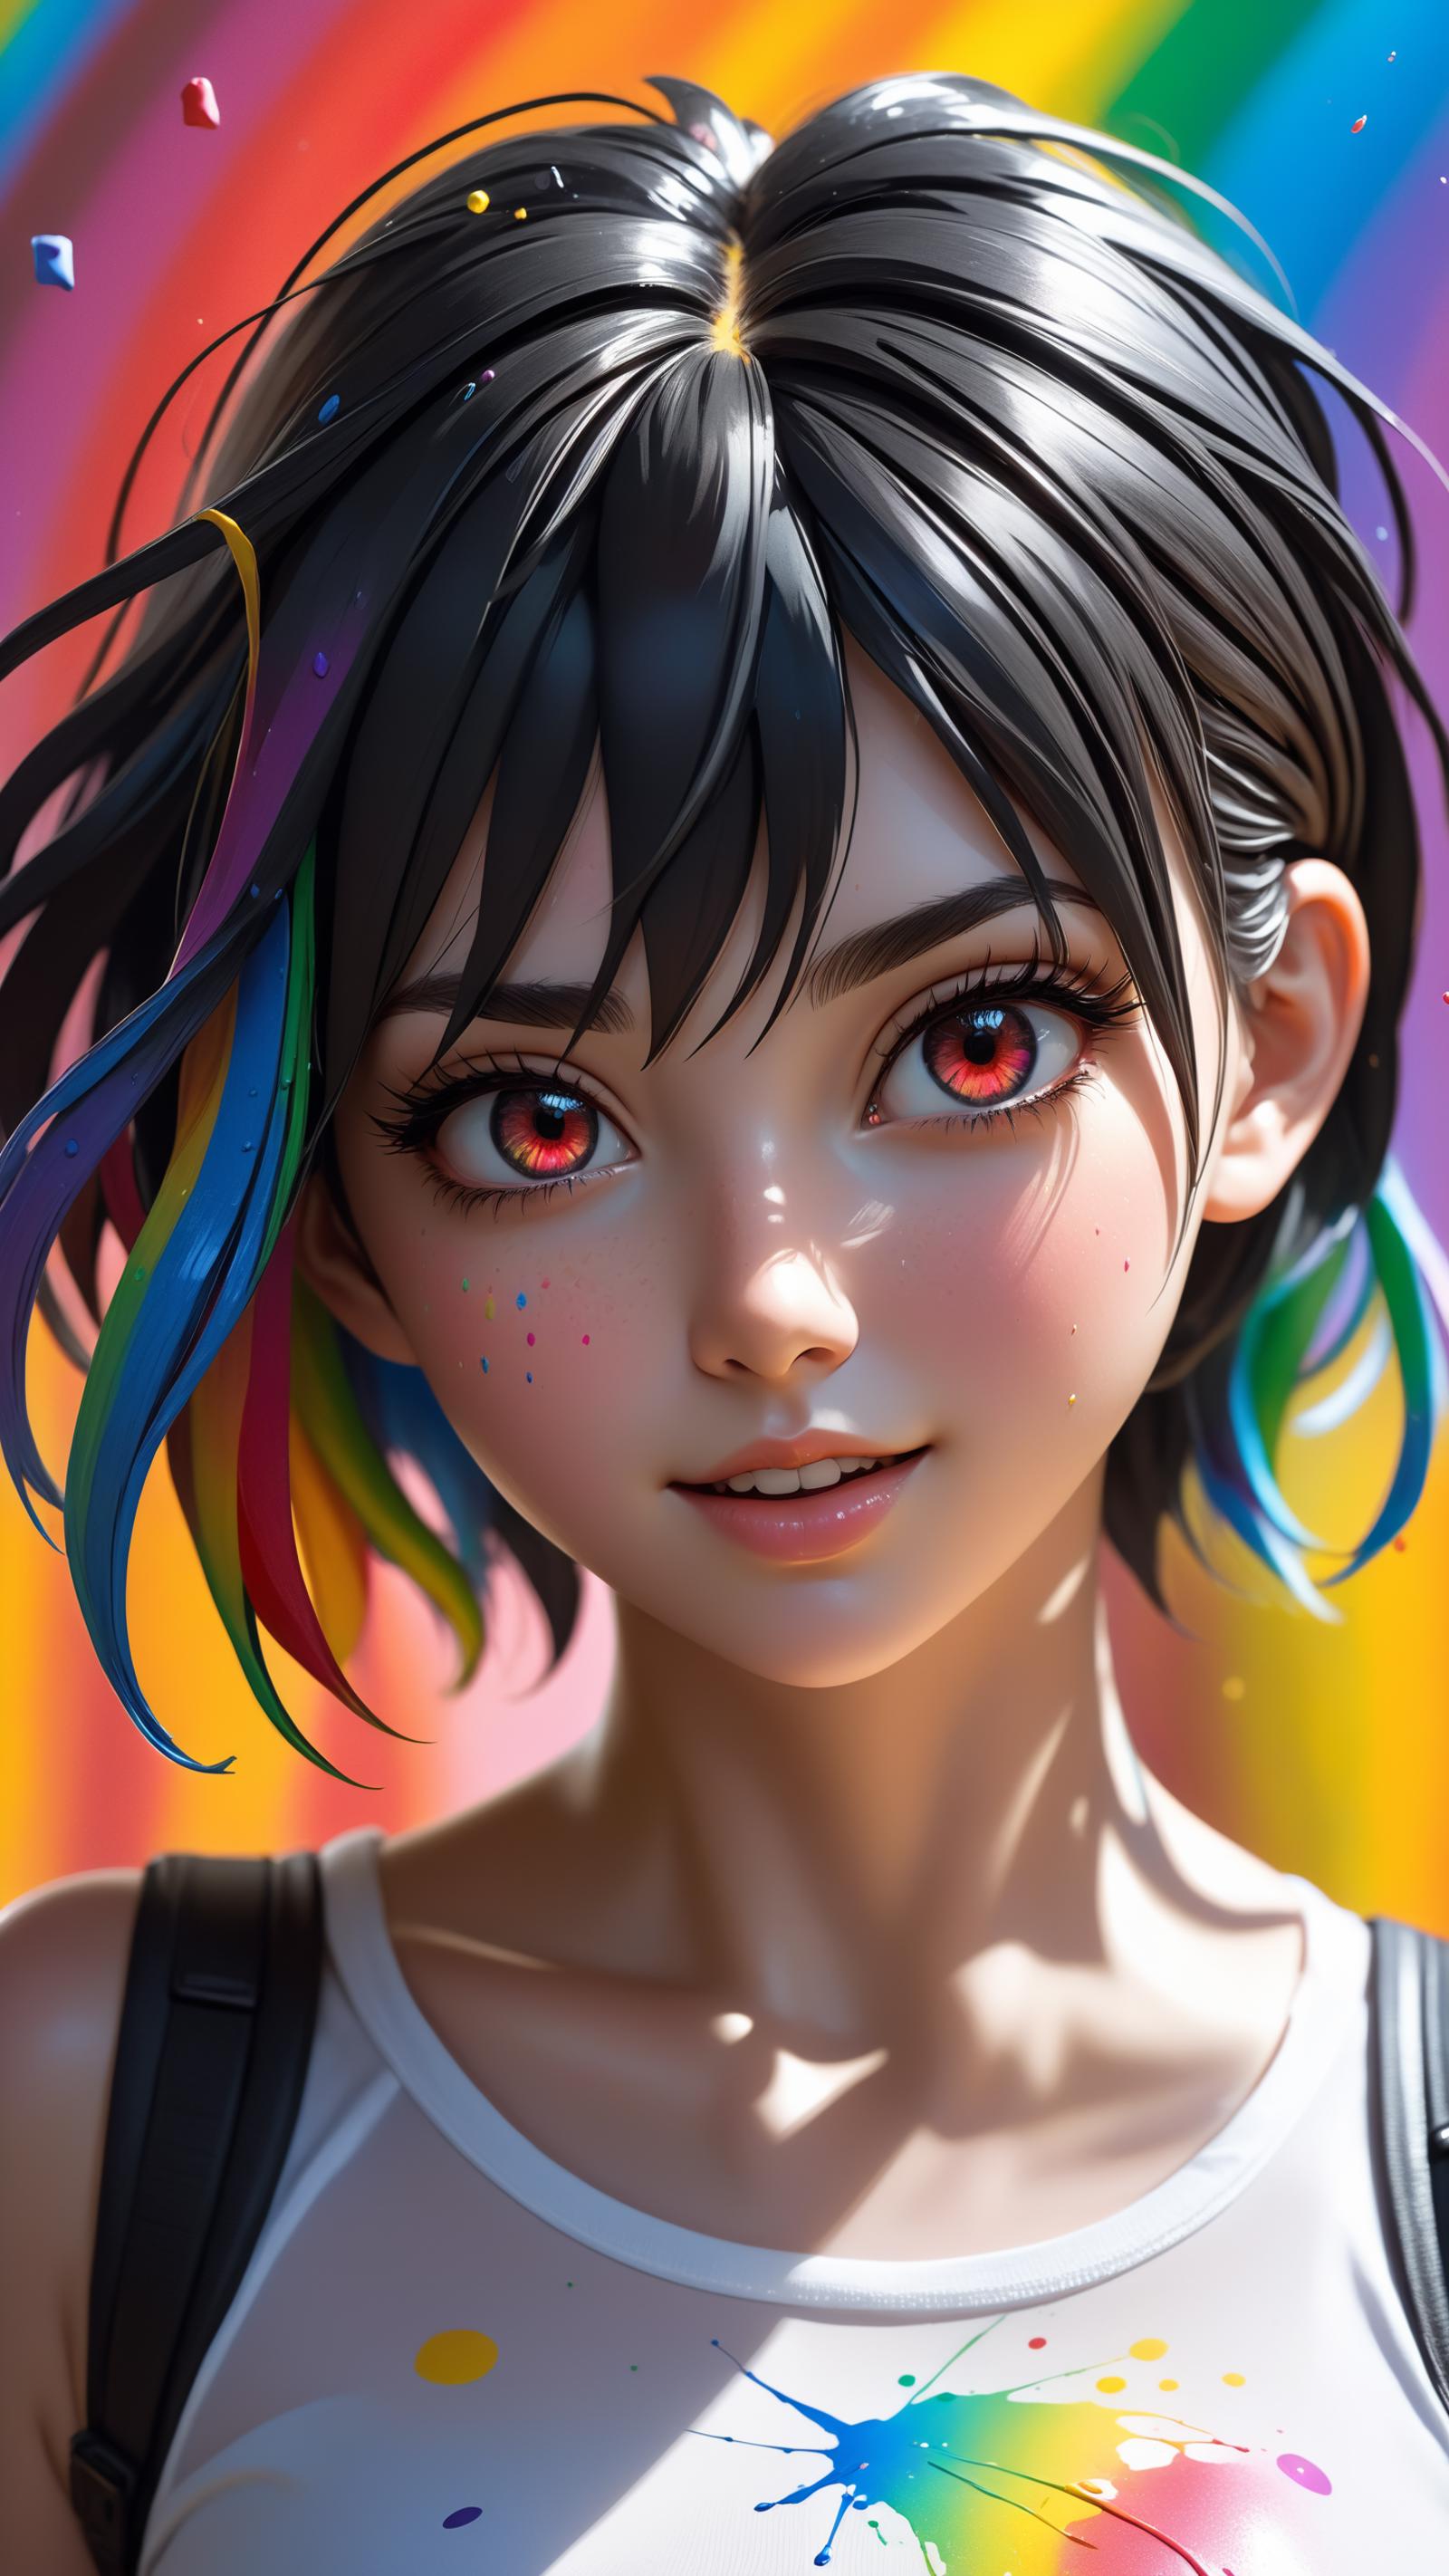 Anime style woman with colorful hair and a painted face.